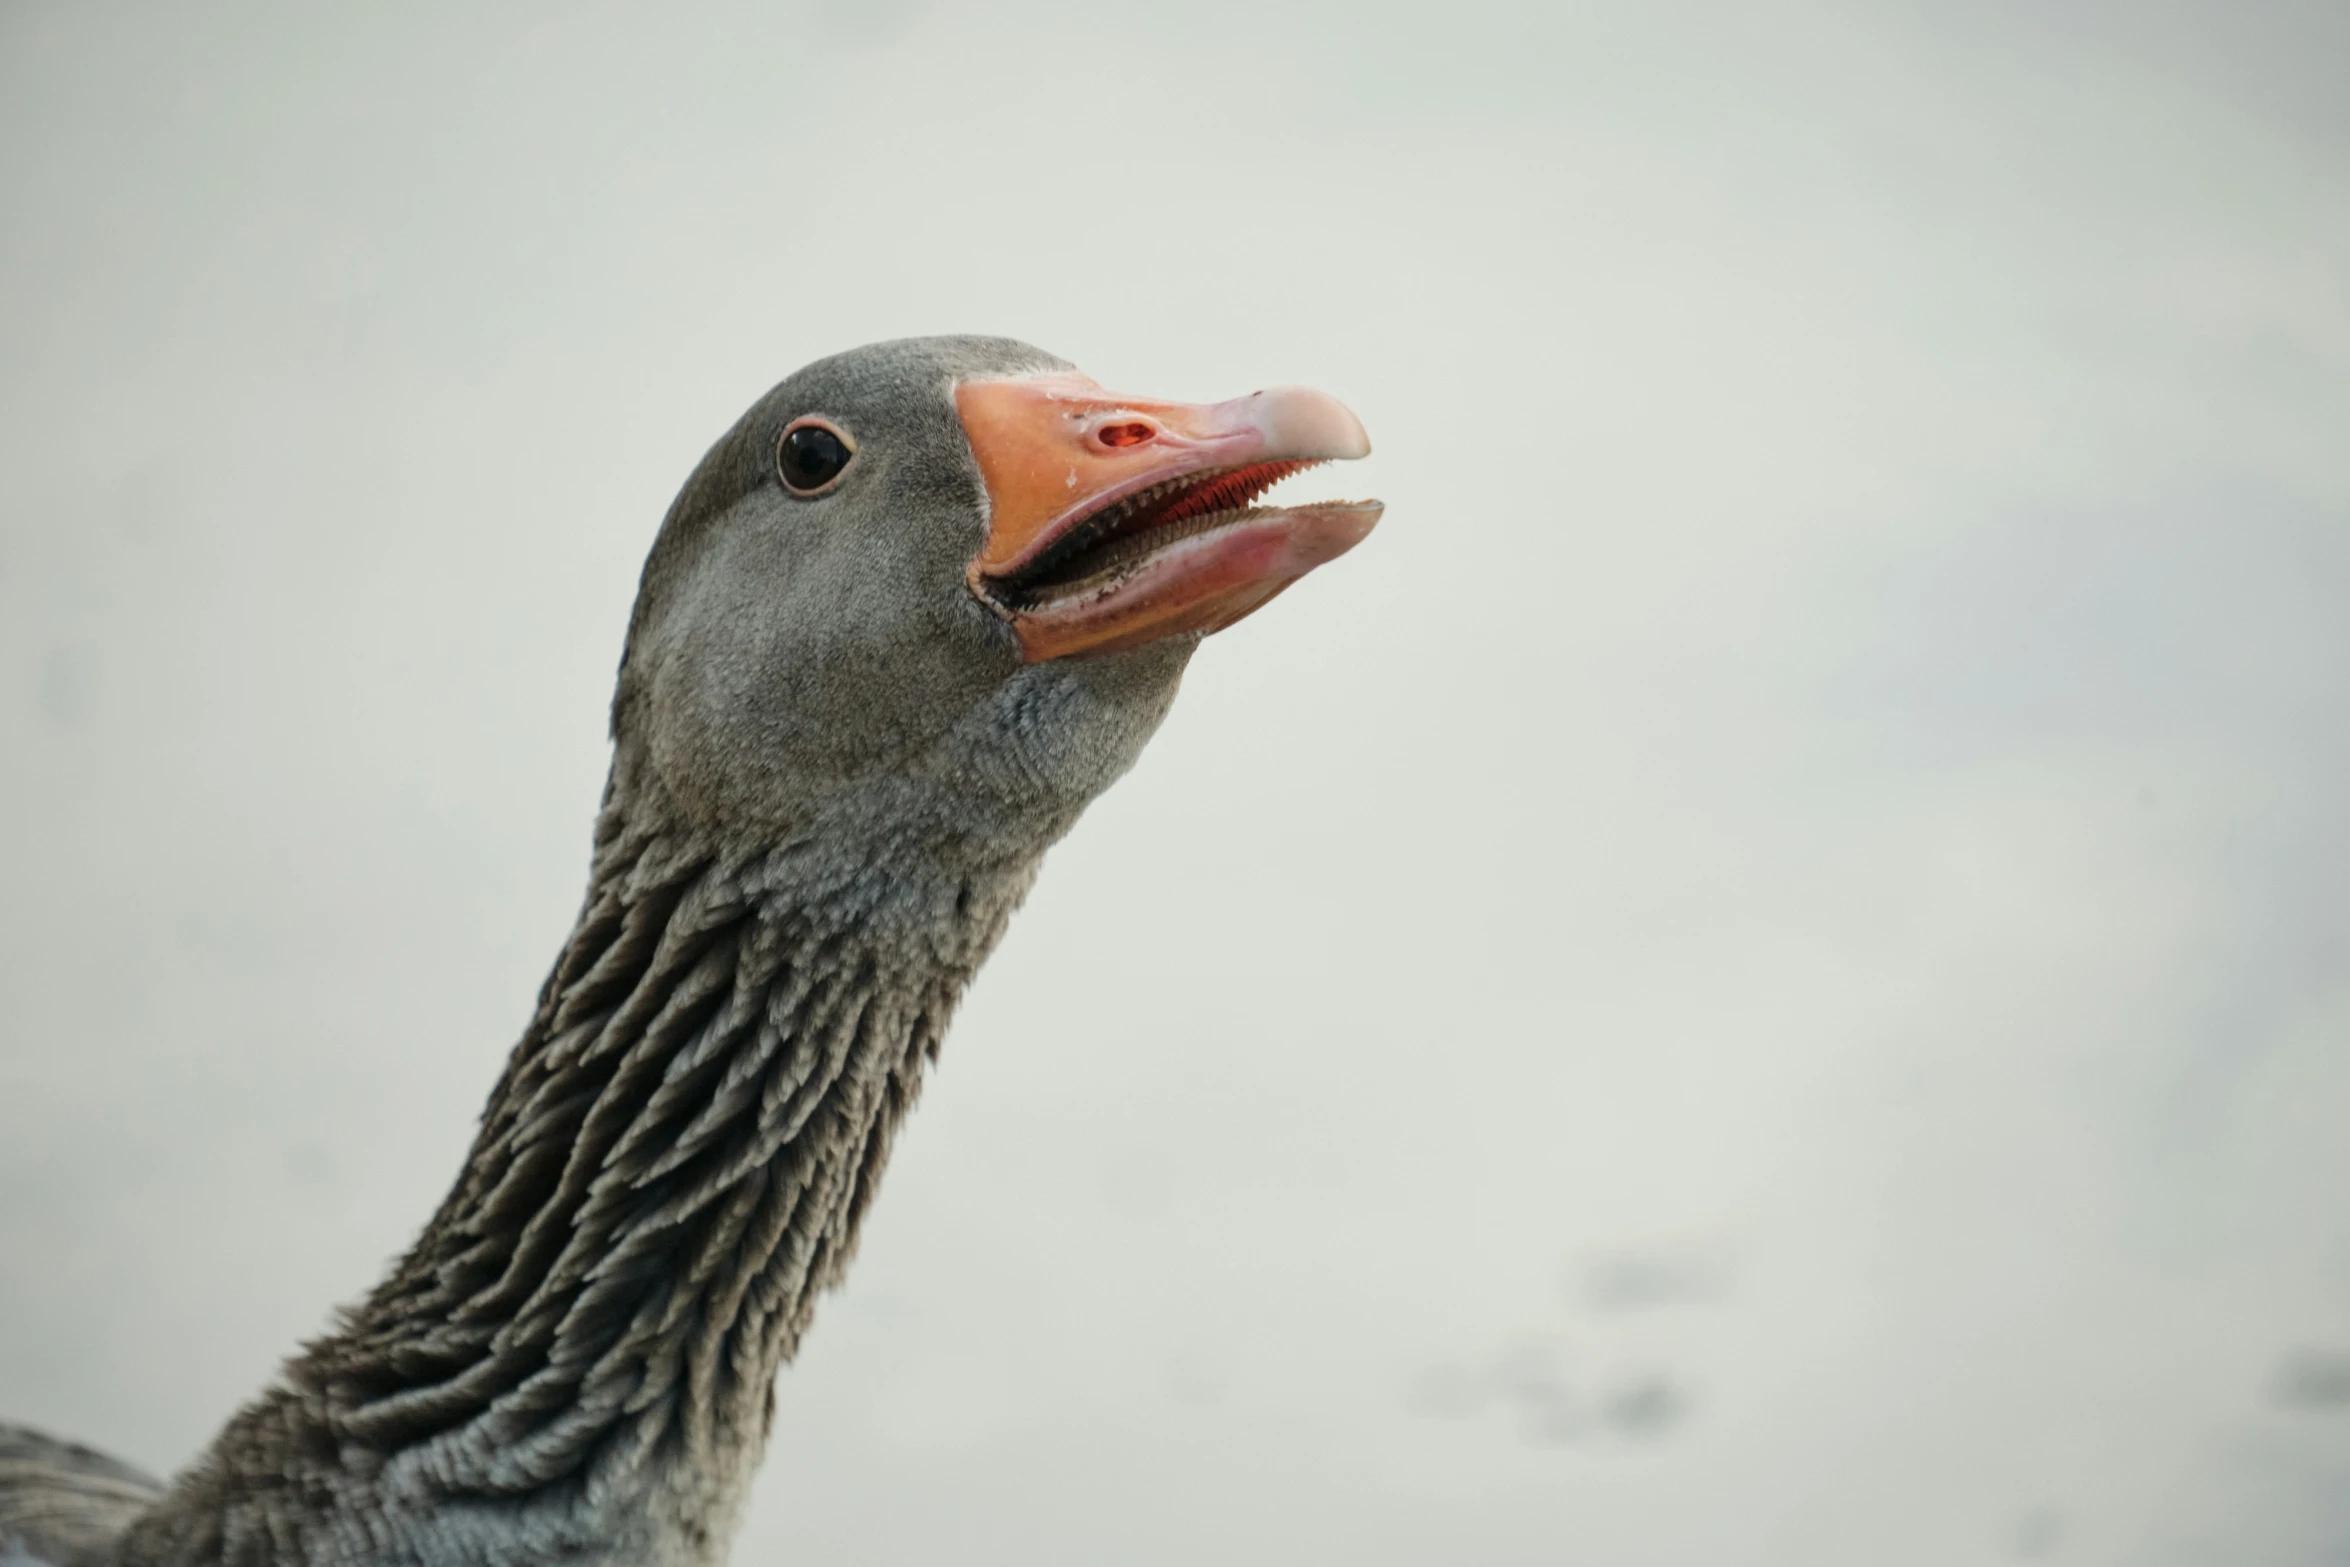 a goose is looking up with its beak open